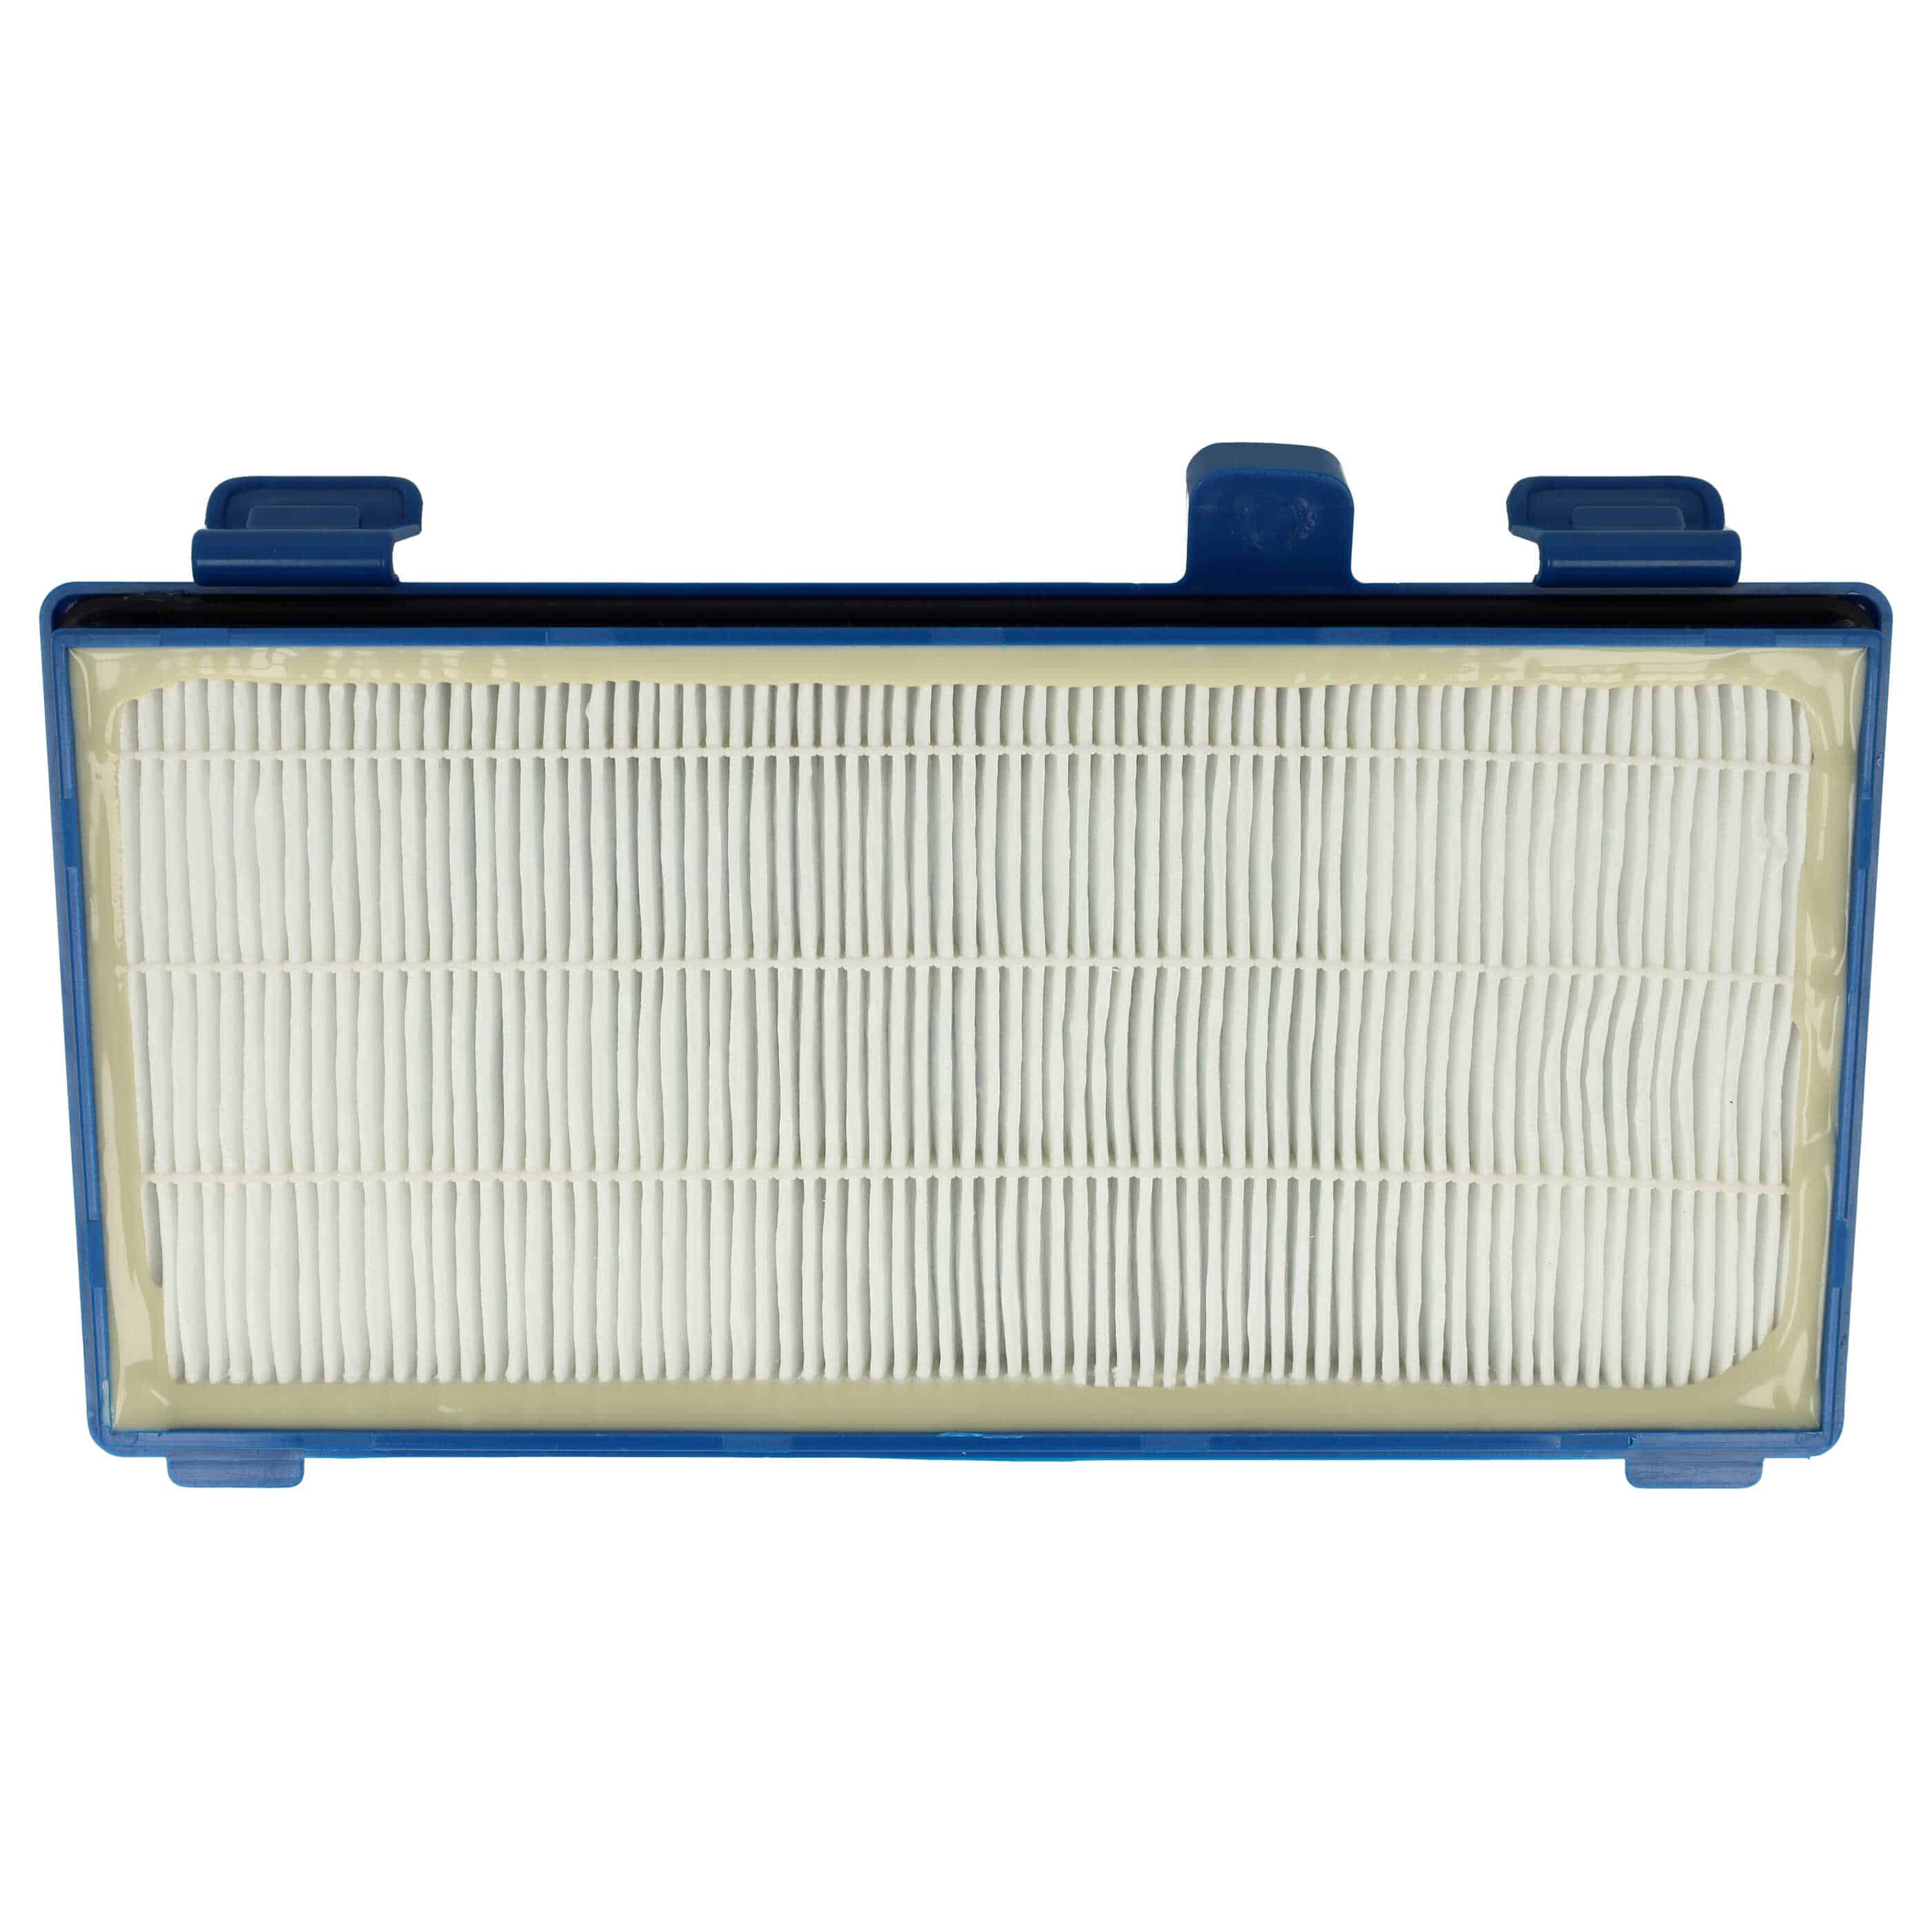 1x HEPA filter replaces Rowenta RS-RT3931, ZR902301 for Rowenta Vacuum Cleaner